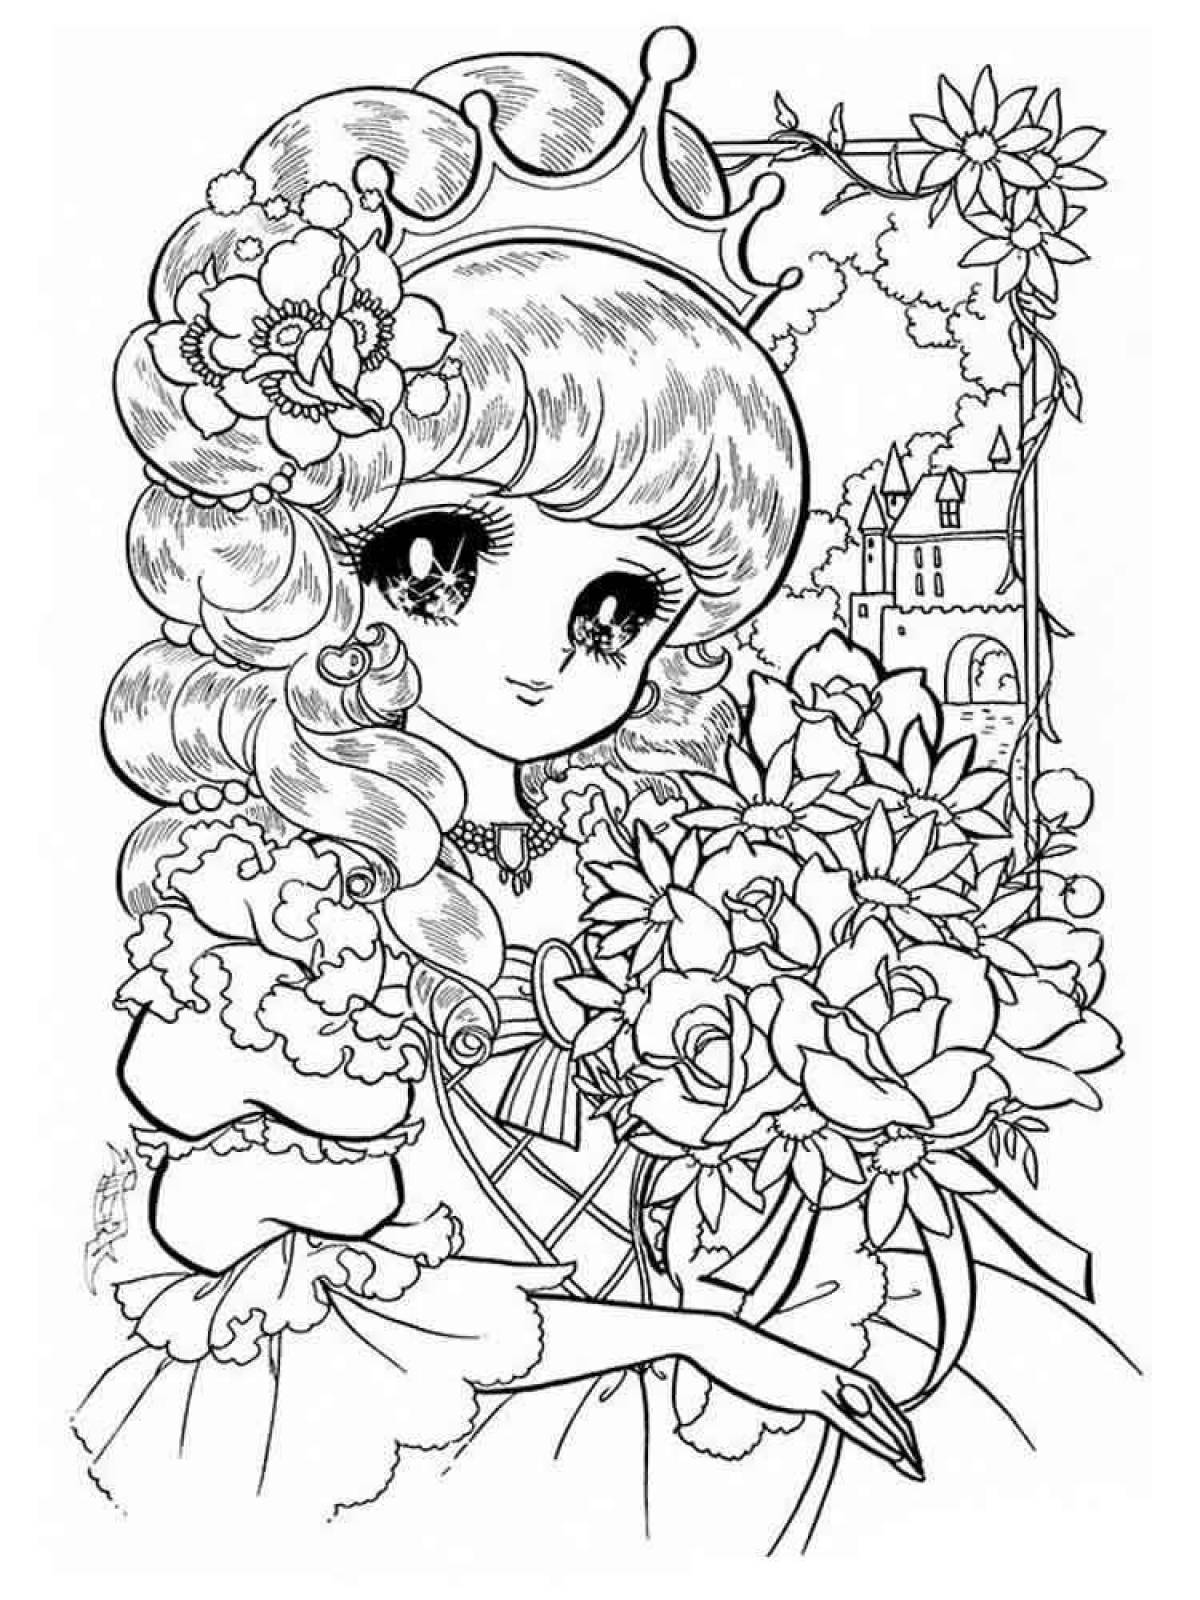 Amazing coloring pages for girls 12 years old, beautiful